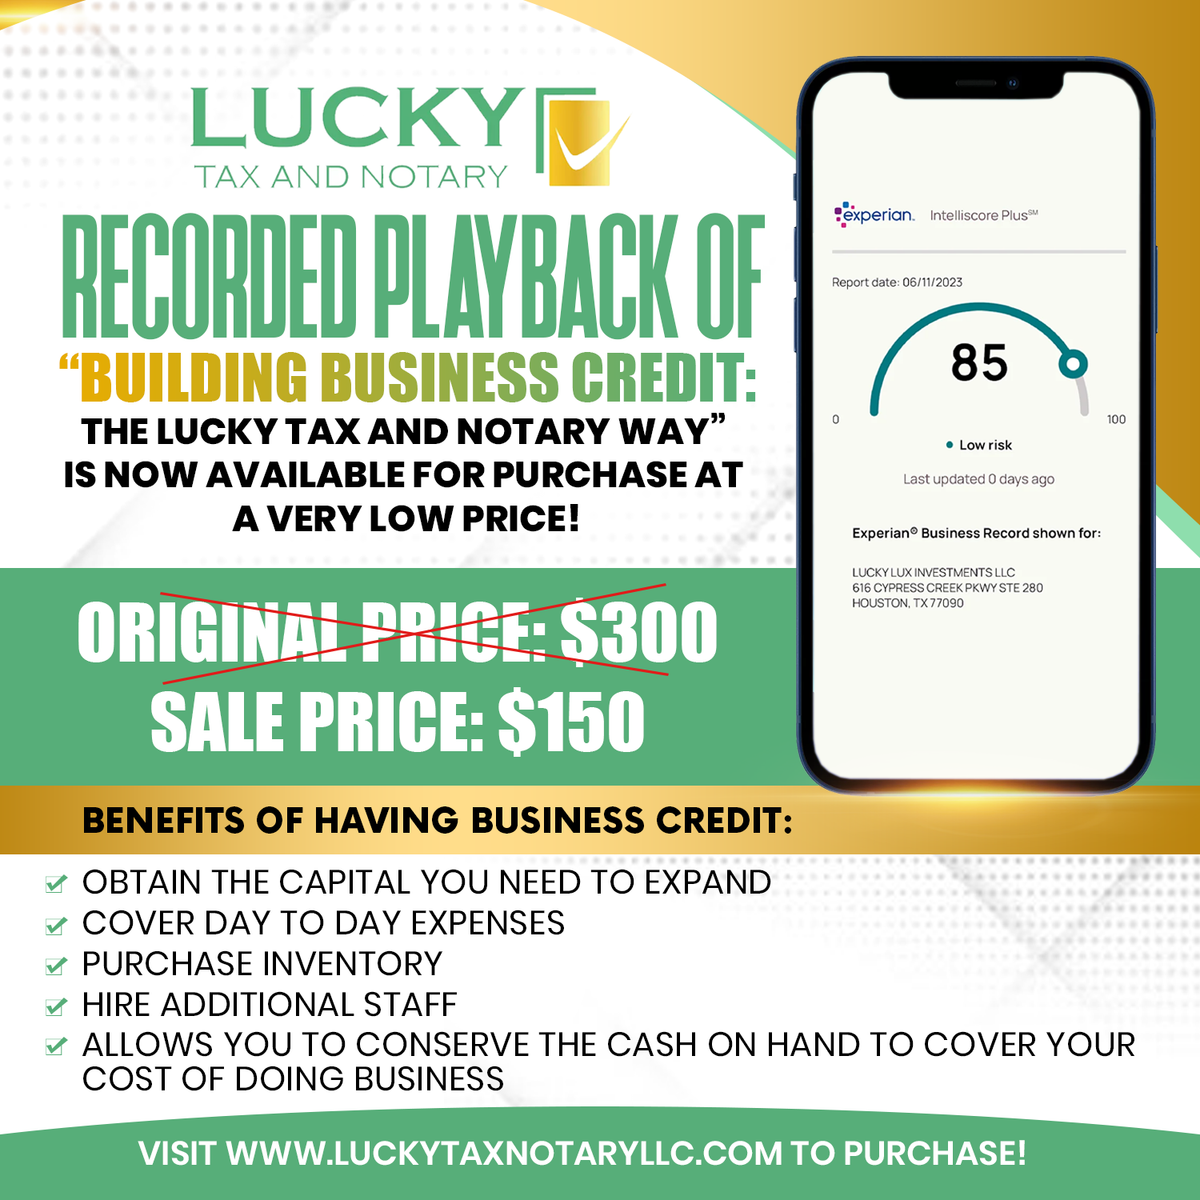 Building Business Credit: The Lucky Tax and Notary Way (Recorded Playback)